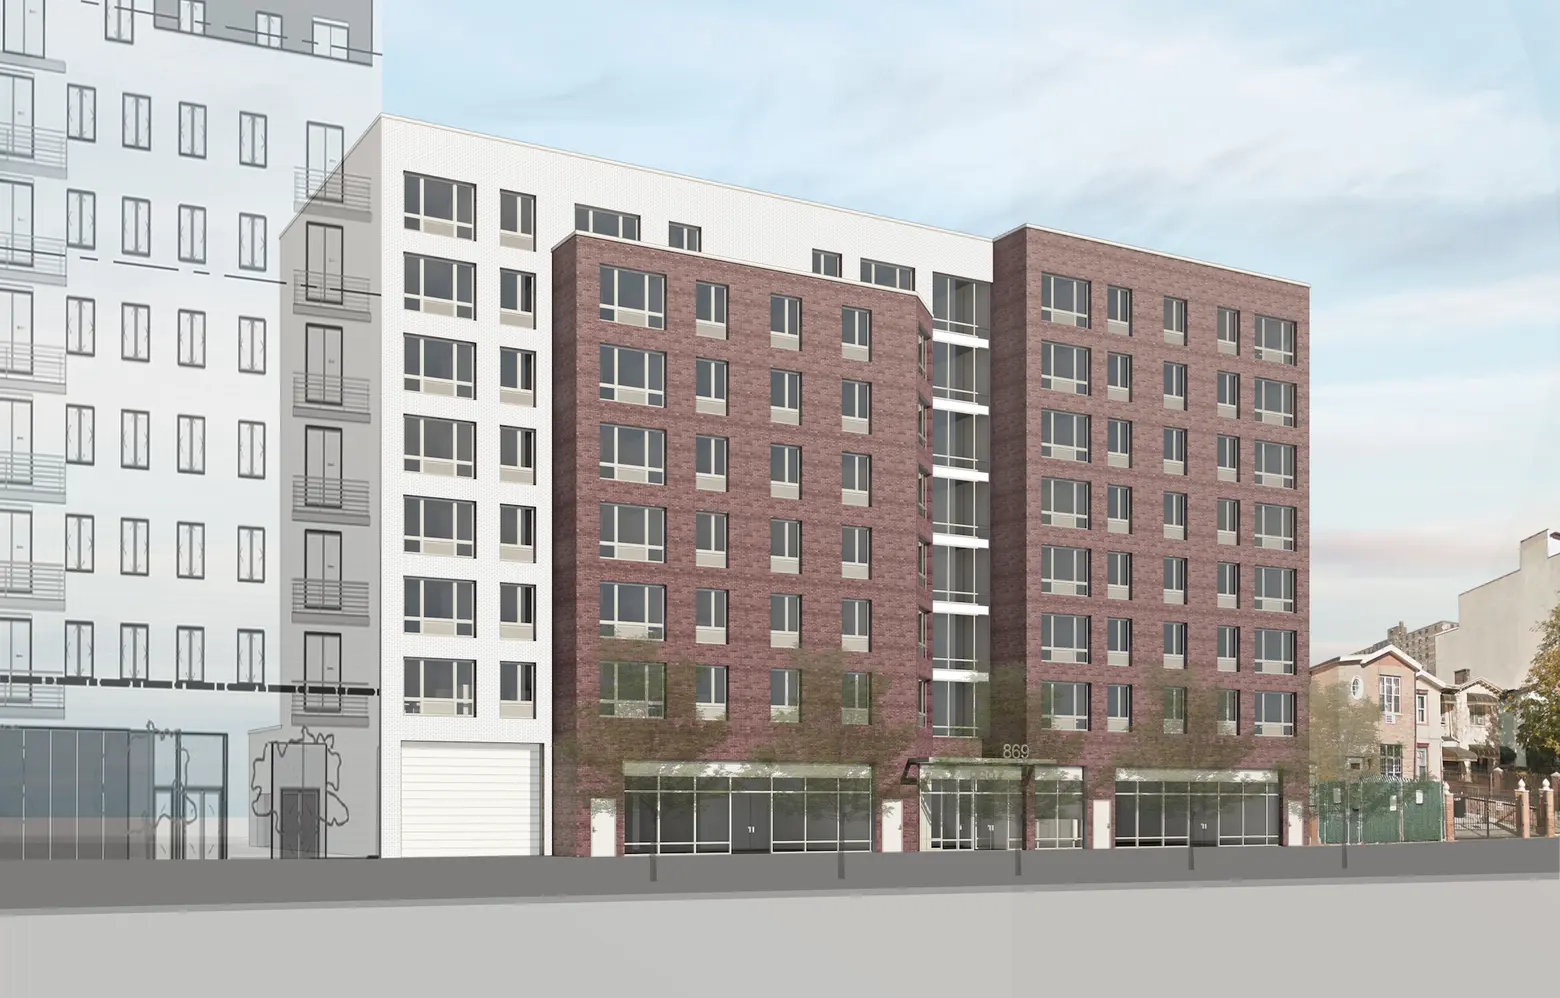 Lottery opens for 44 affordable apartments at former factory complex in Bed-Stuy, from $1,041/month